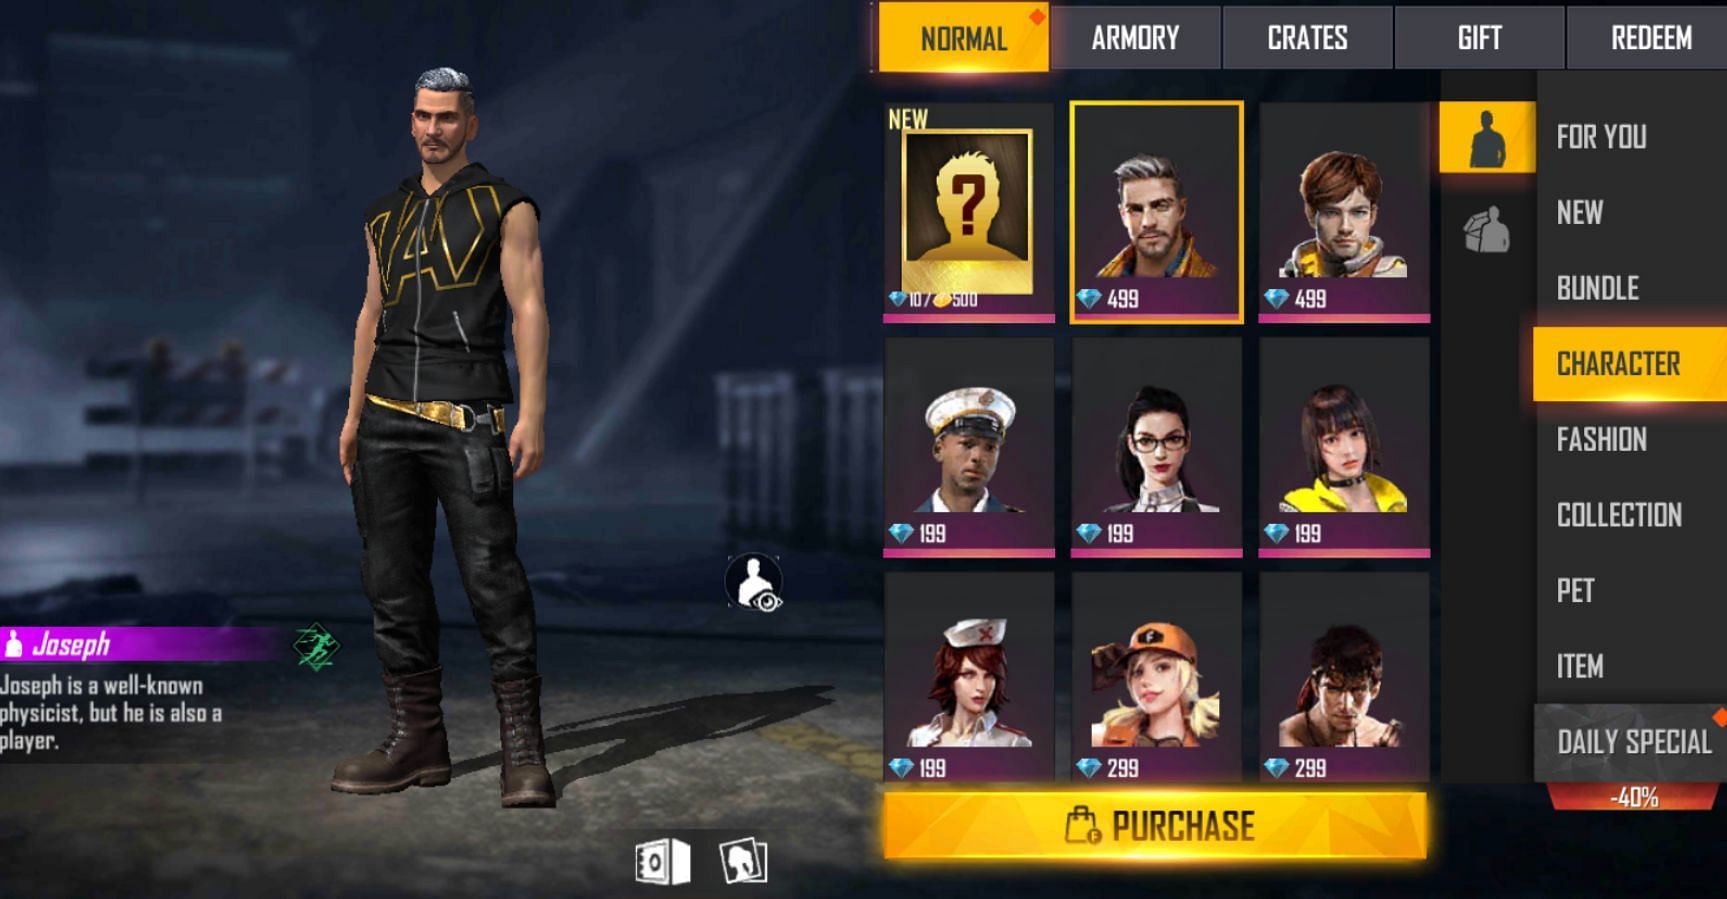 5 Pro Tips to Save Diamonds in Free Fire 